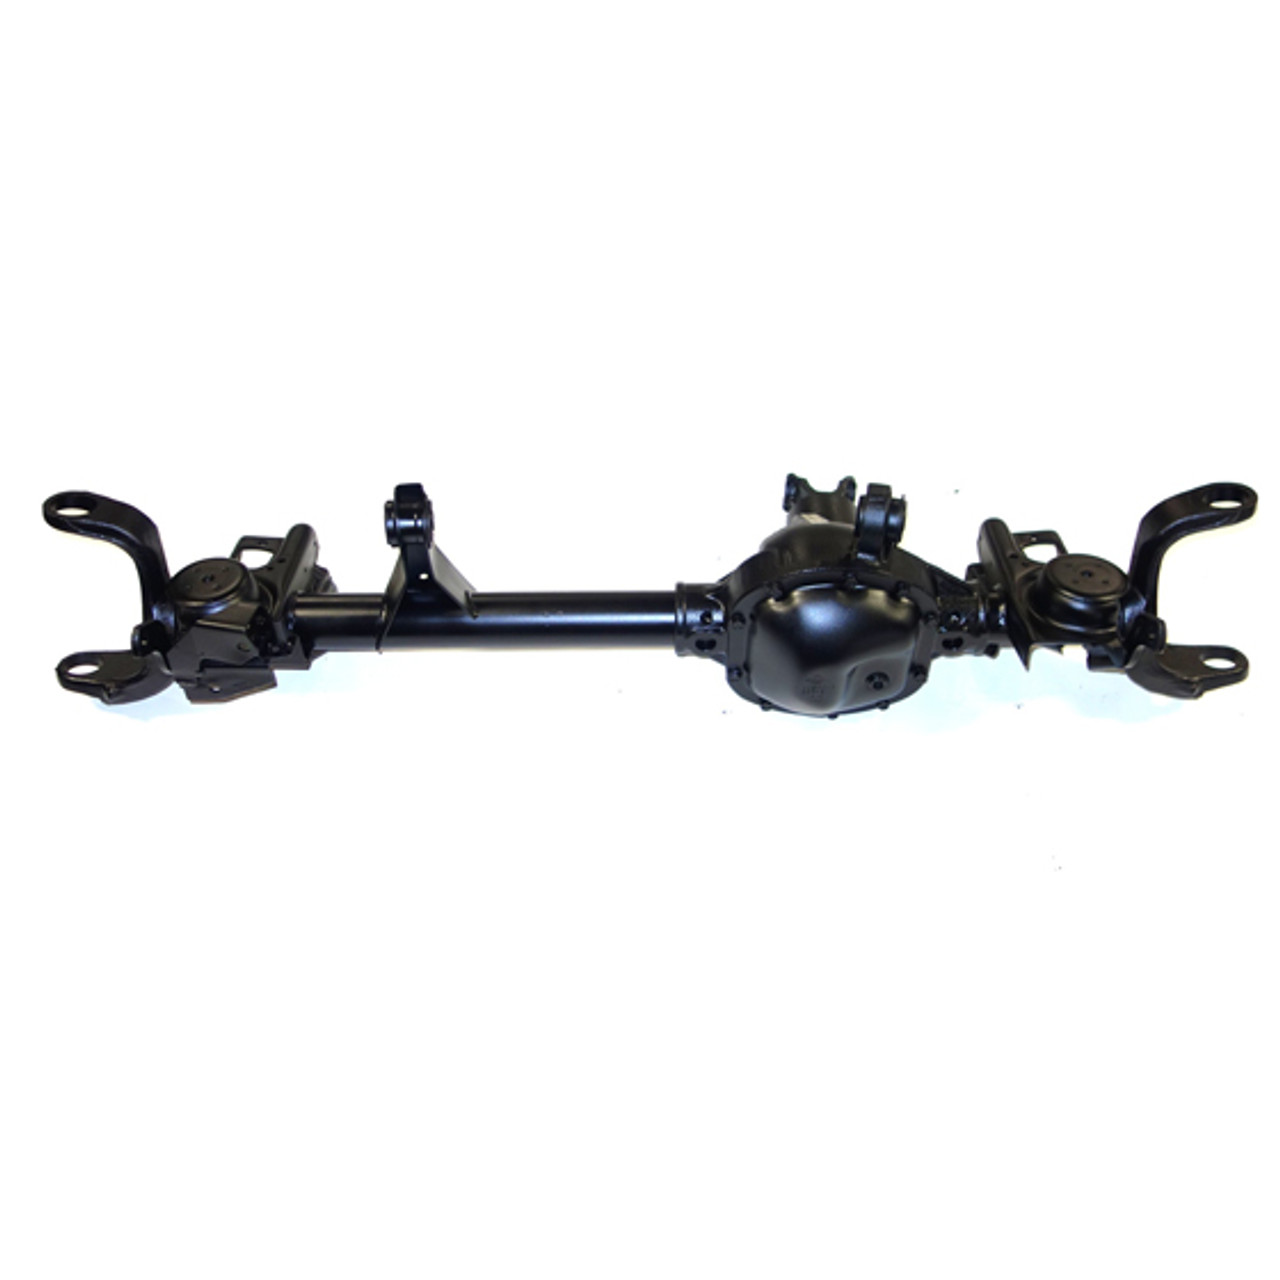 Reman Complete Axle Assembly for Dana 30 03-05 Jeep Wrangler 4.56 Ratio with ABS